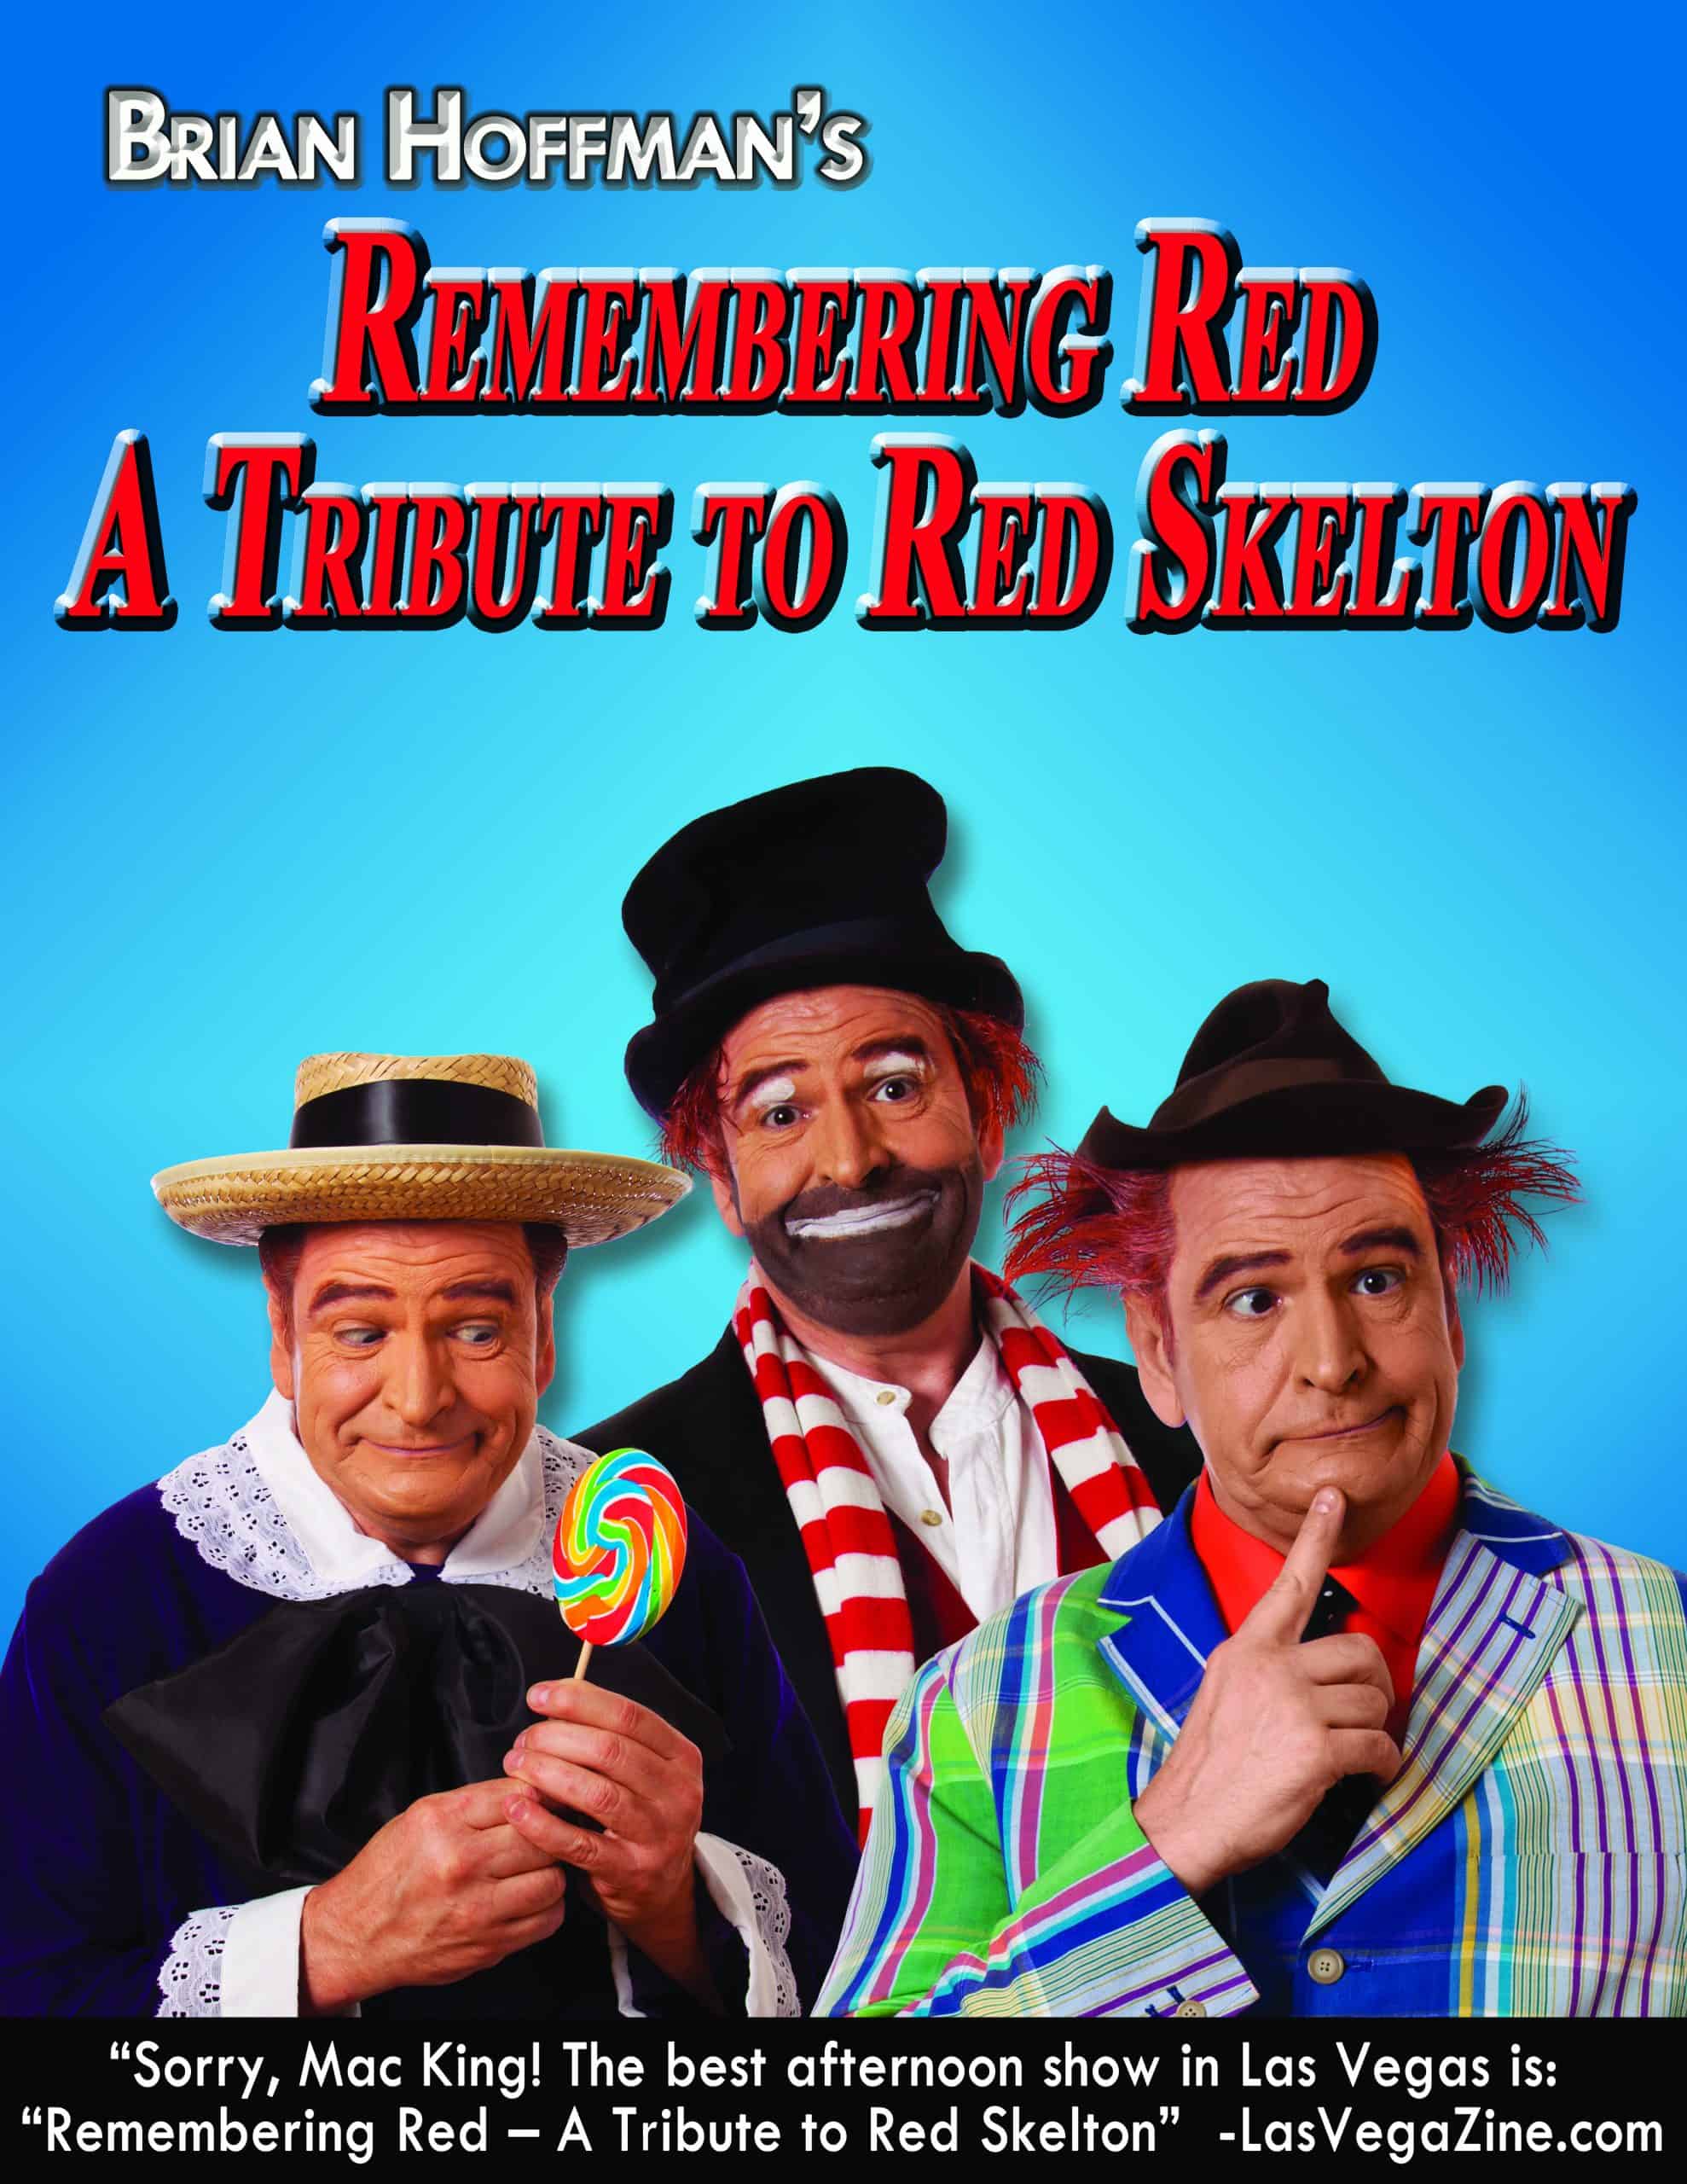 Remembering Red: A tribute to Red Skelton starring Brian Hoffman